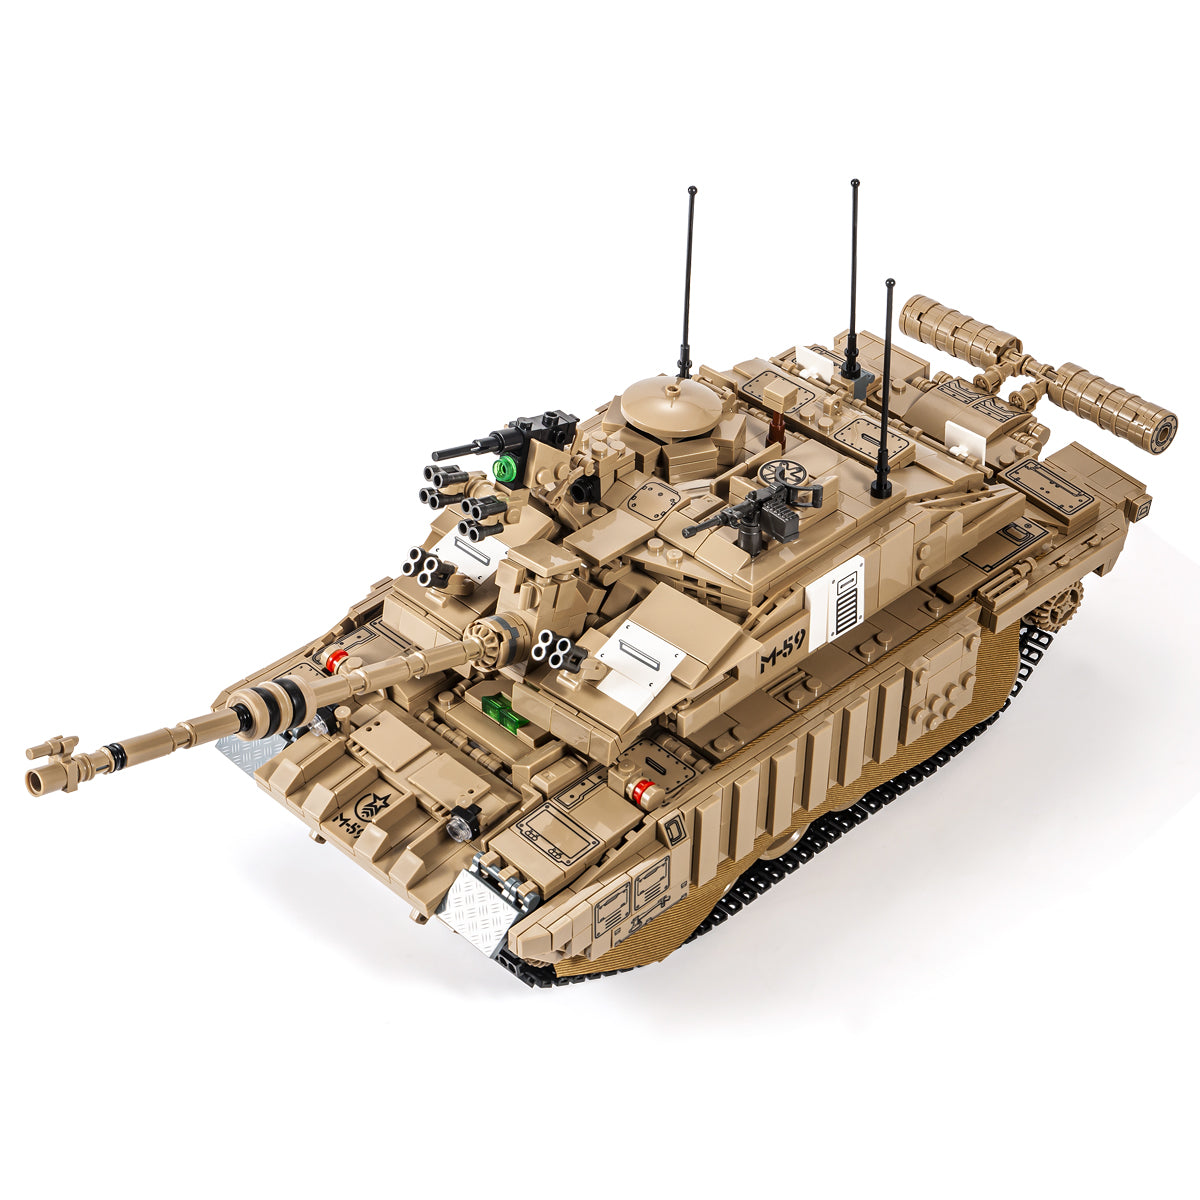 DAHONPA Military Series Challenger II Series Main Battle Tank Army Building Block with 1687 Pieces, Military Historical Collection Model